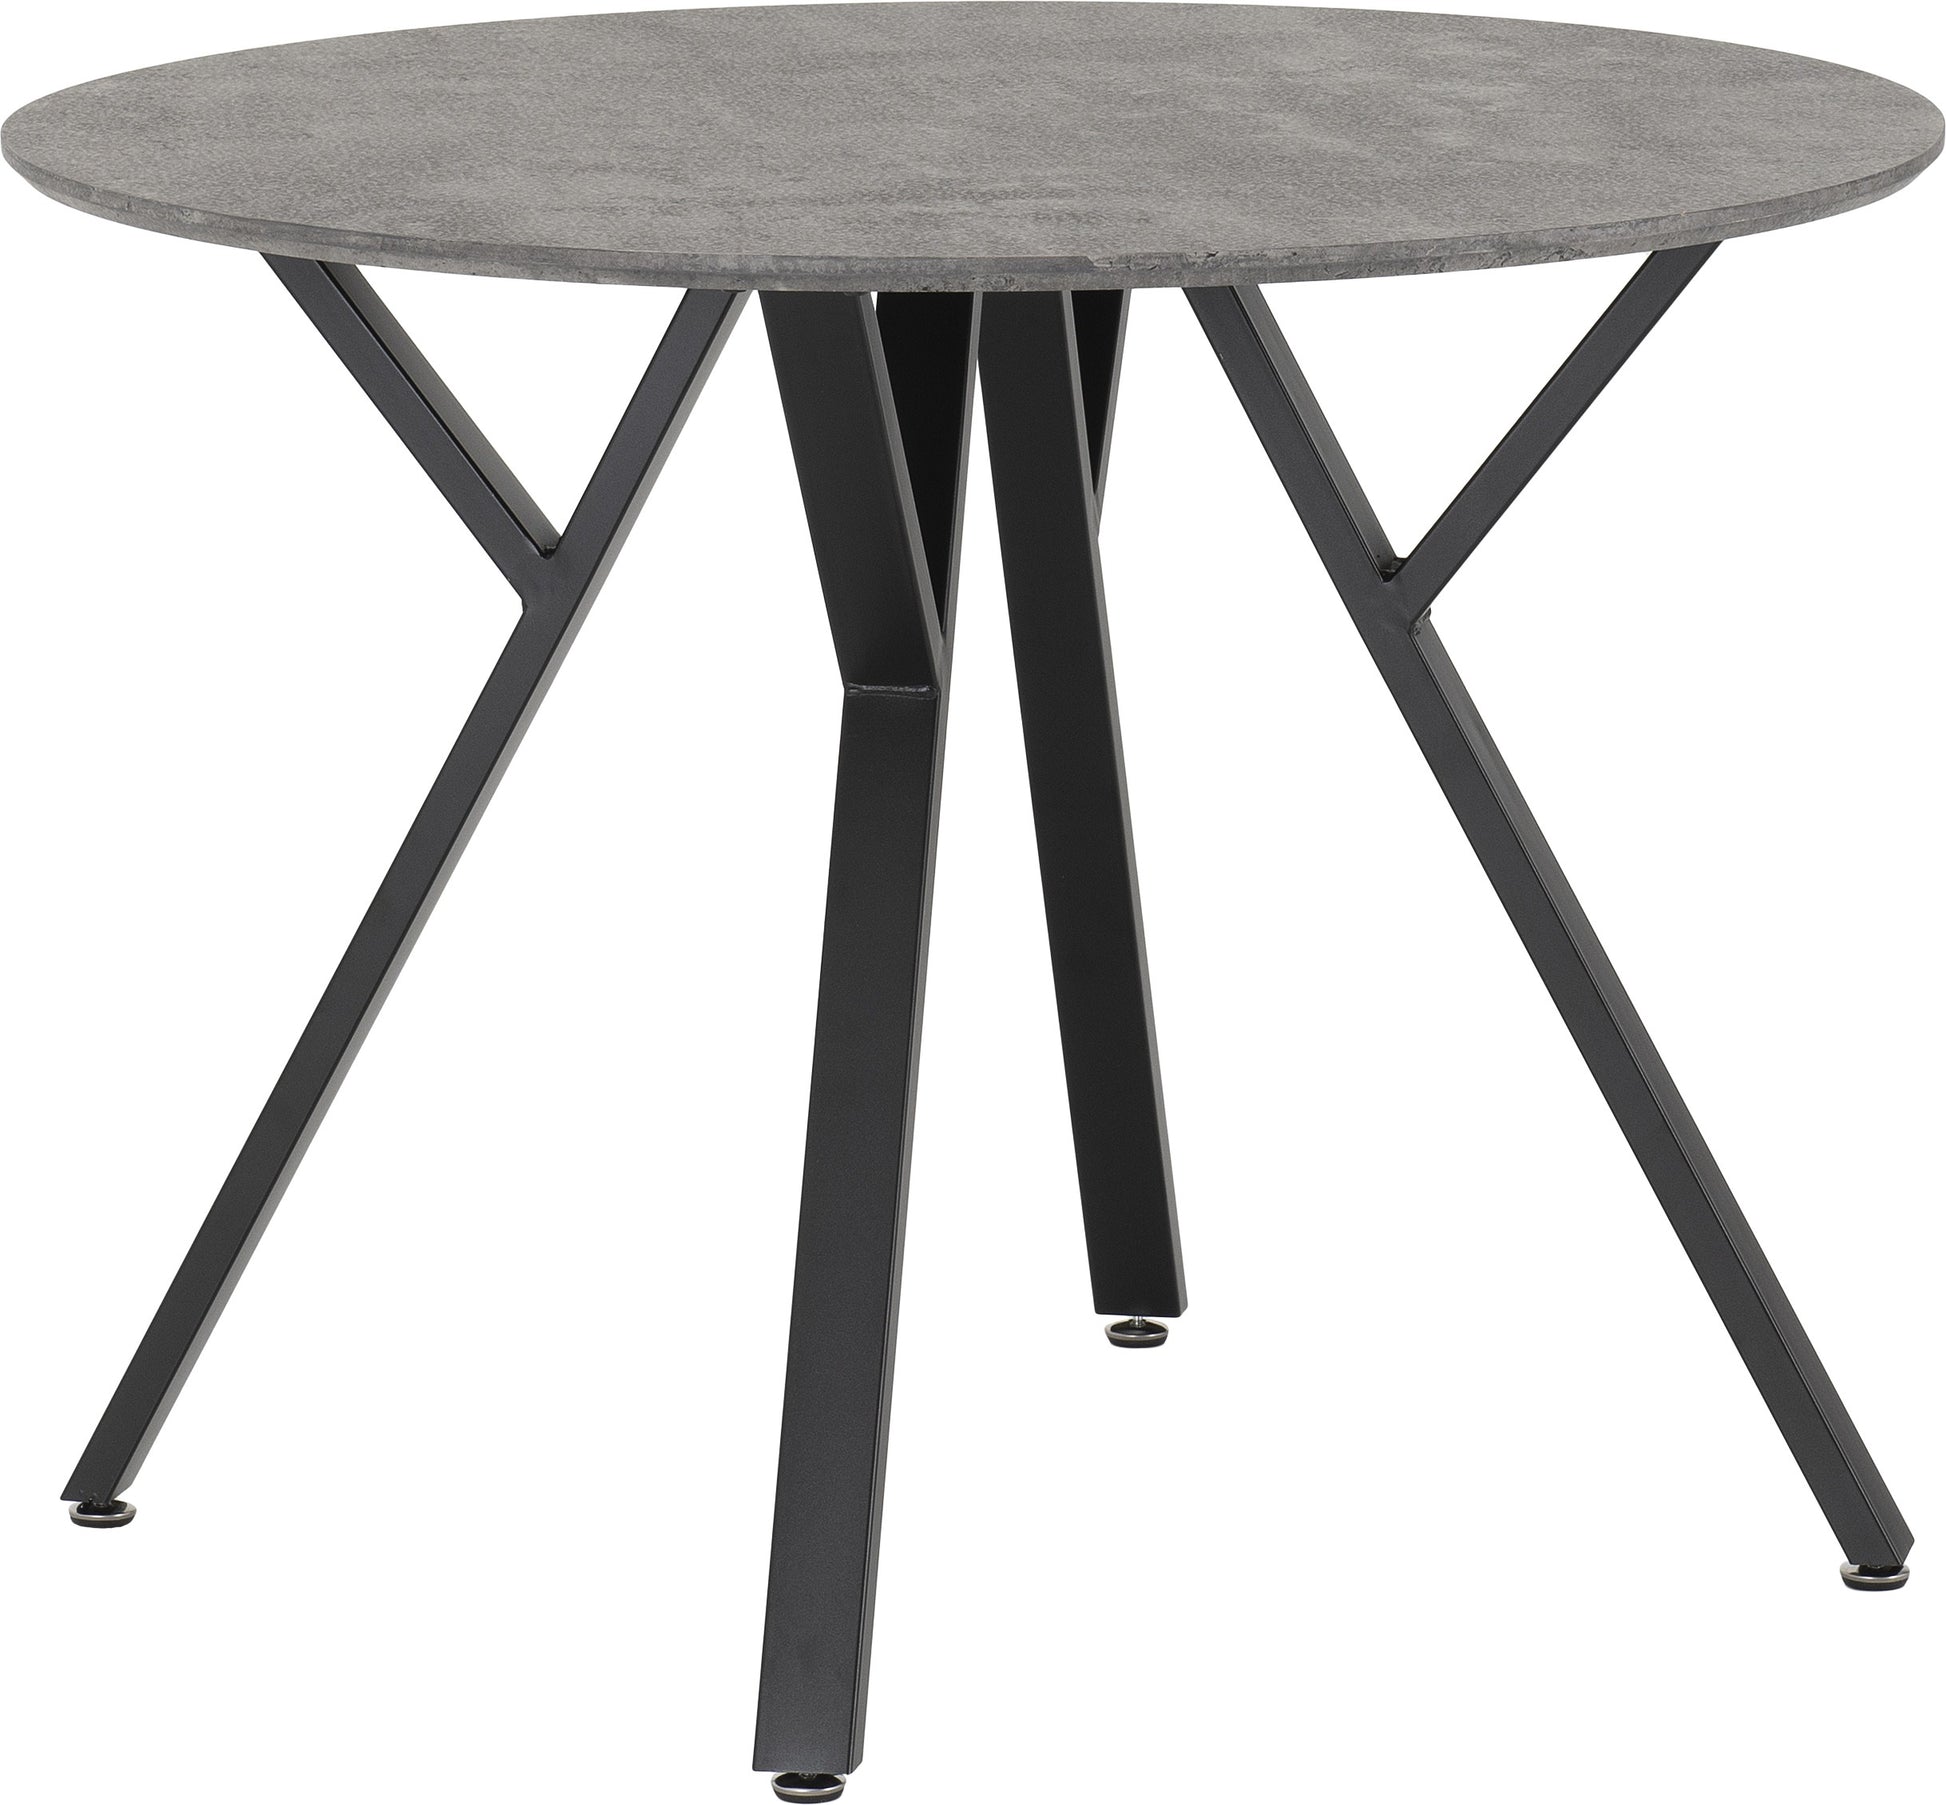 Athens Round Dining Set with Lukas Chairs - Concrete Effect/Black/Grey Velvet